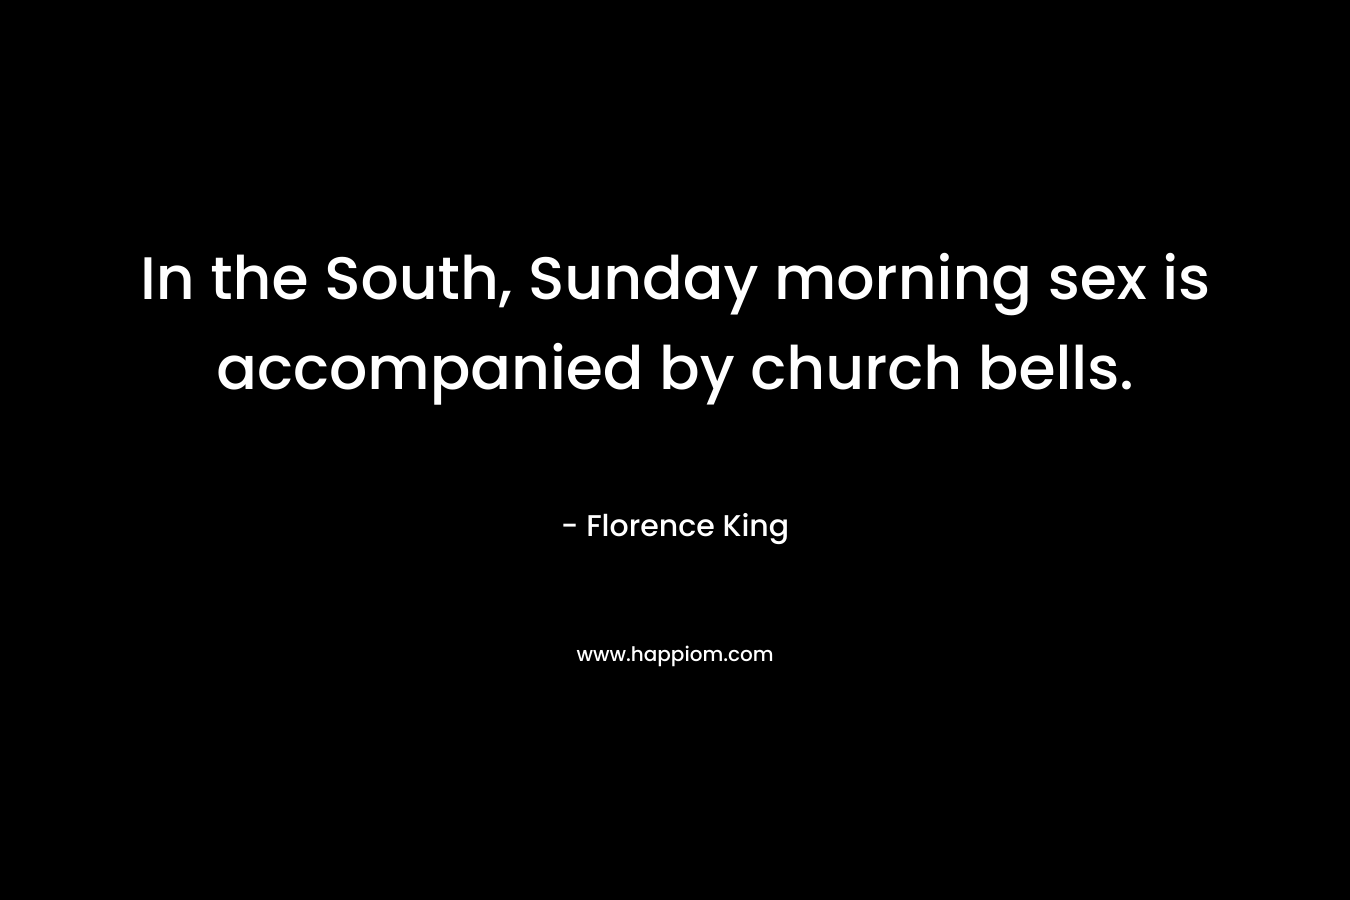 In the South, Sunday morning sex is accompanied by church bells.